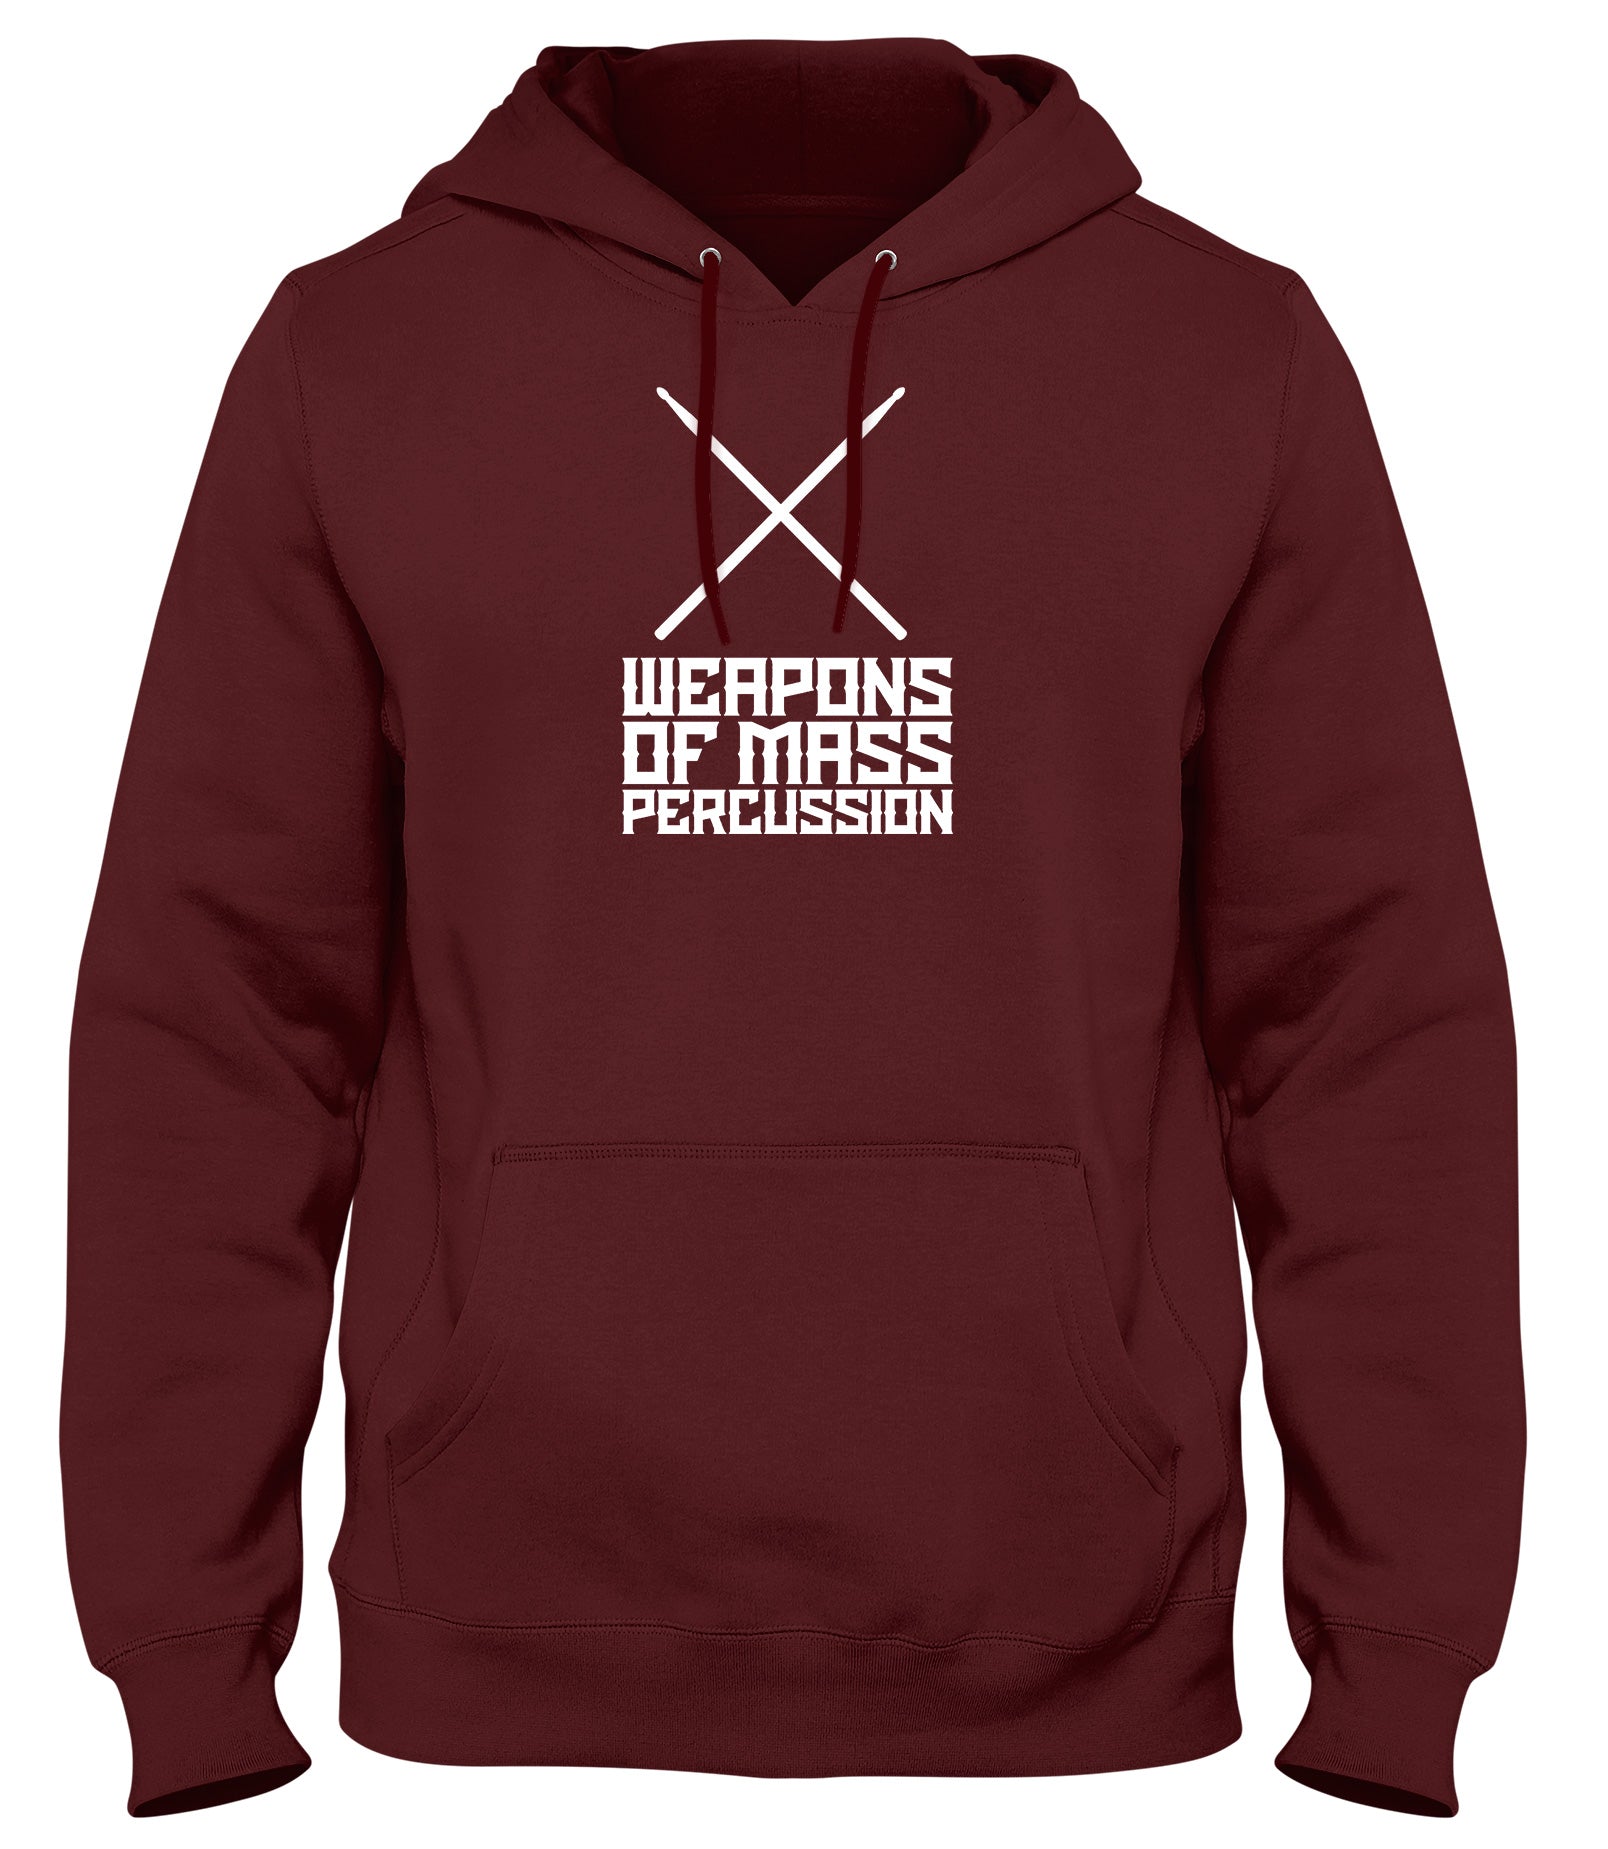 WEAPONS OF MASS PERCUSSION MENS WOMENS LADIES UNISEX FUNNY SLOGAN HOODIE